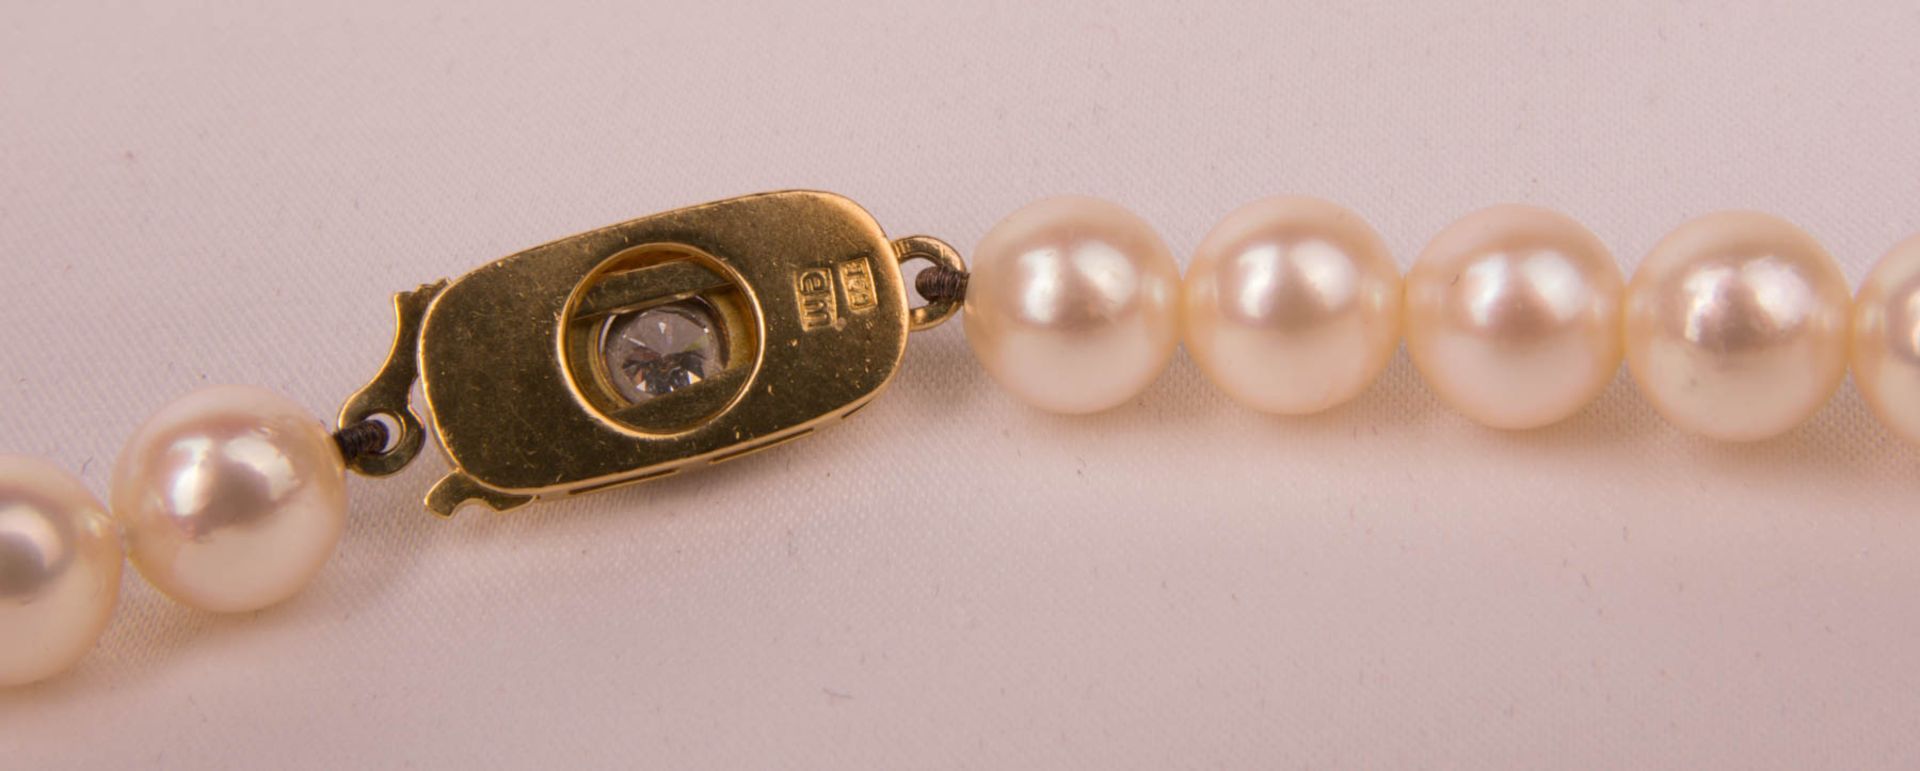 Pearl necklace with diamond set pendant, 750 yellow gold. - Image 6 of 6